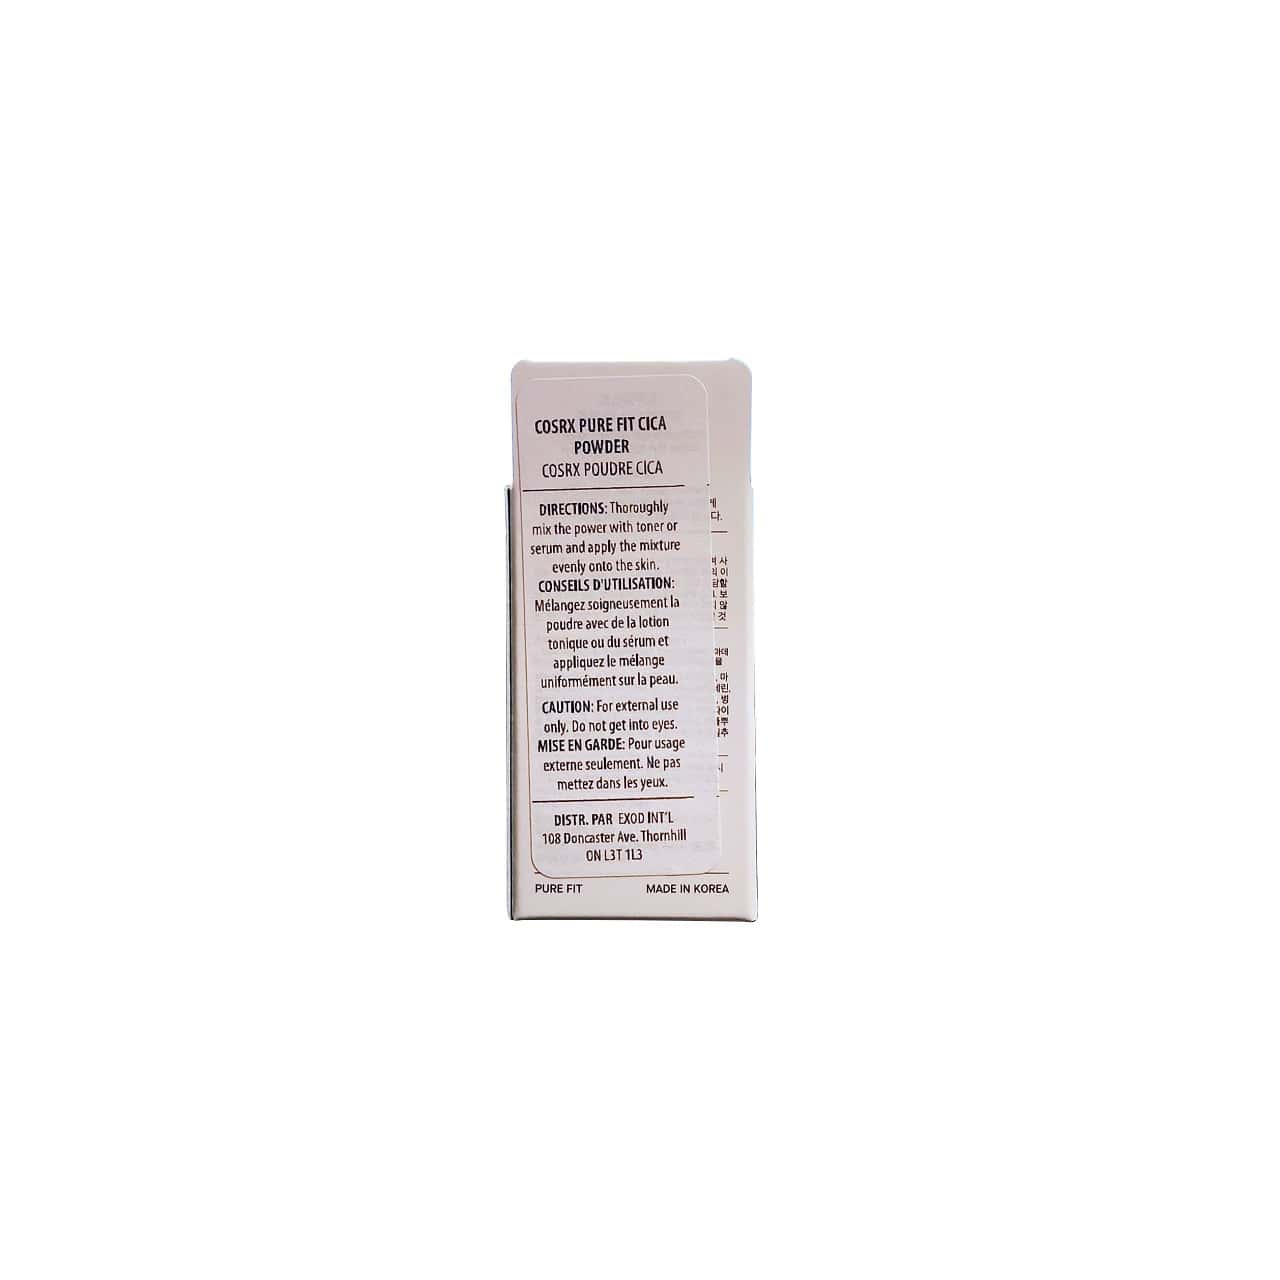 Directions, cautions for COSRX Pure Fit Cica Powder (7 grams) 